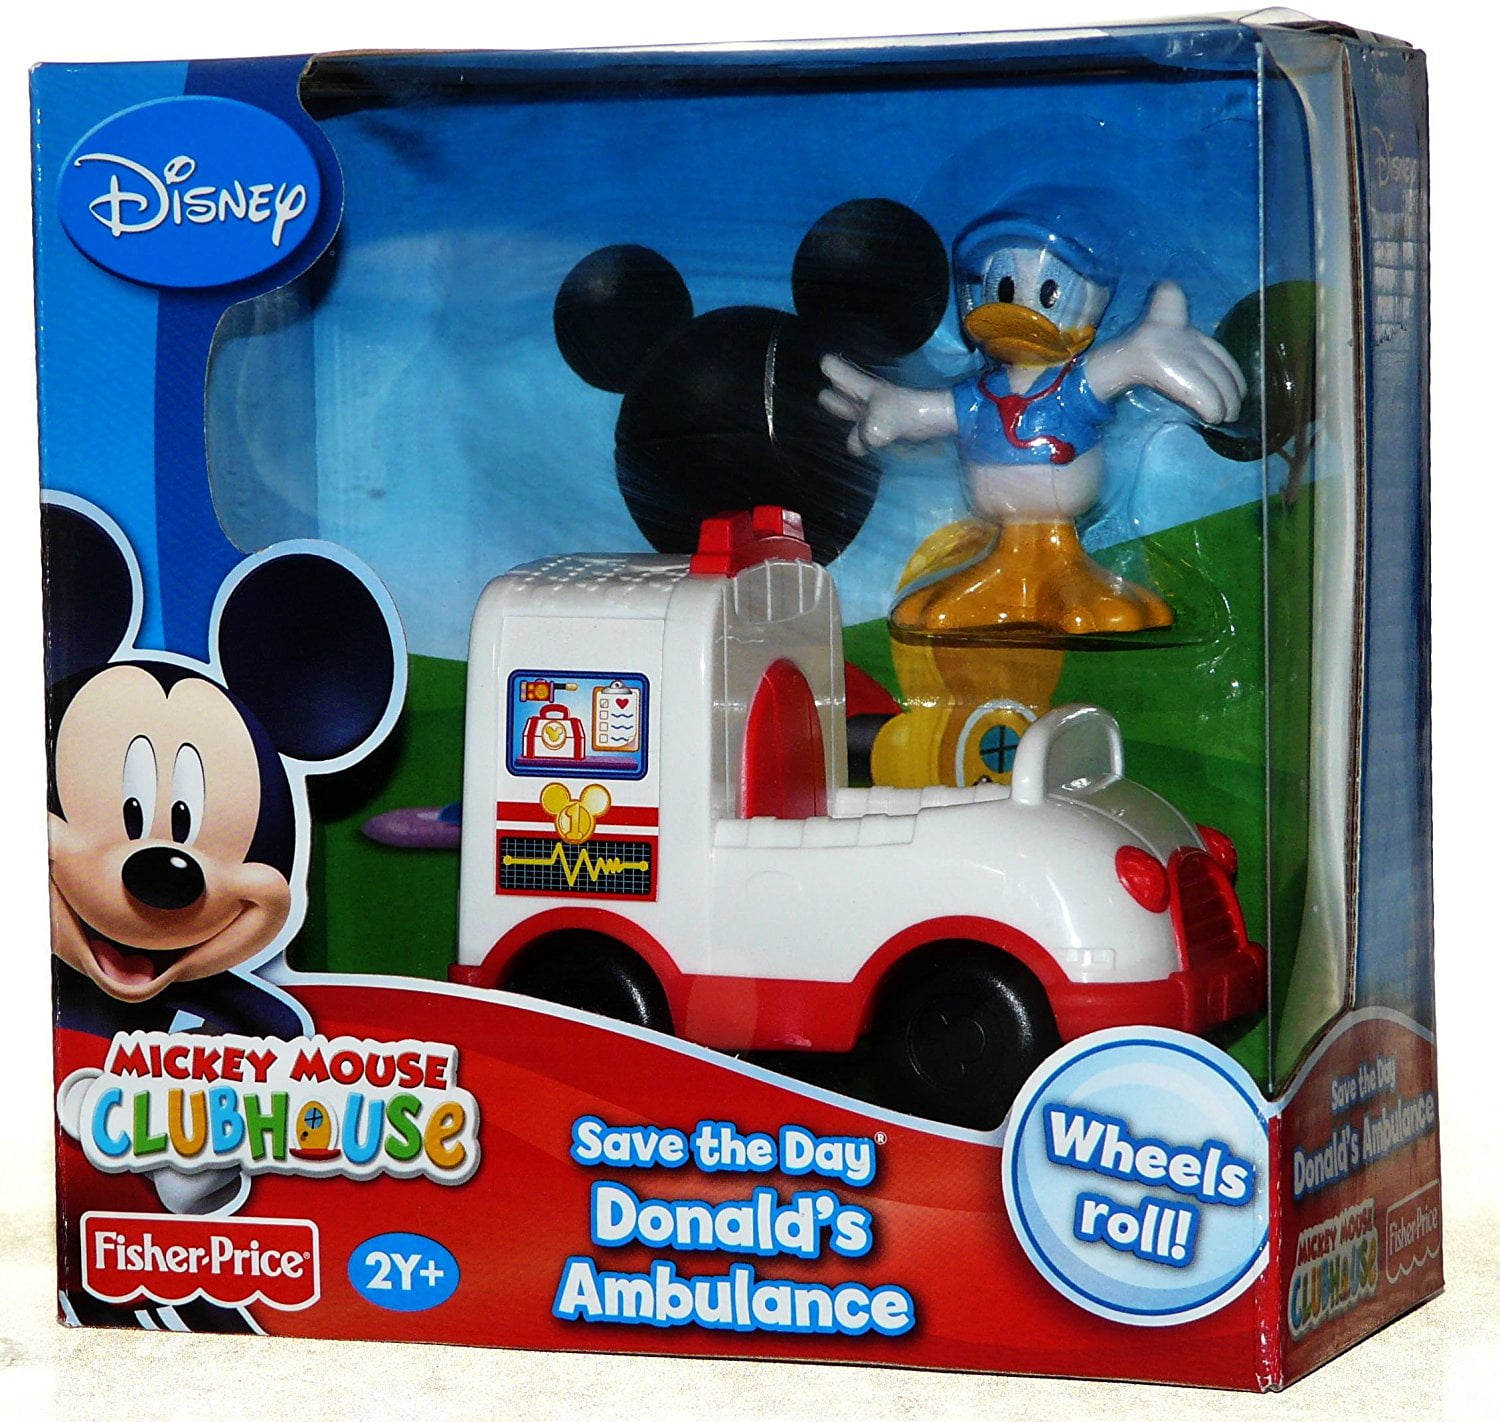 DISNEY MICKEY MOUSE CLUBHOUSE,DONALD DUCK'S AMBULANCE,FIGURE & VEHICLE,2+,NEW